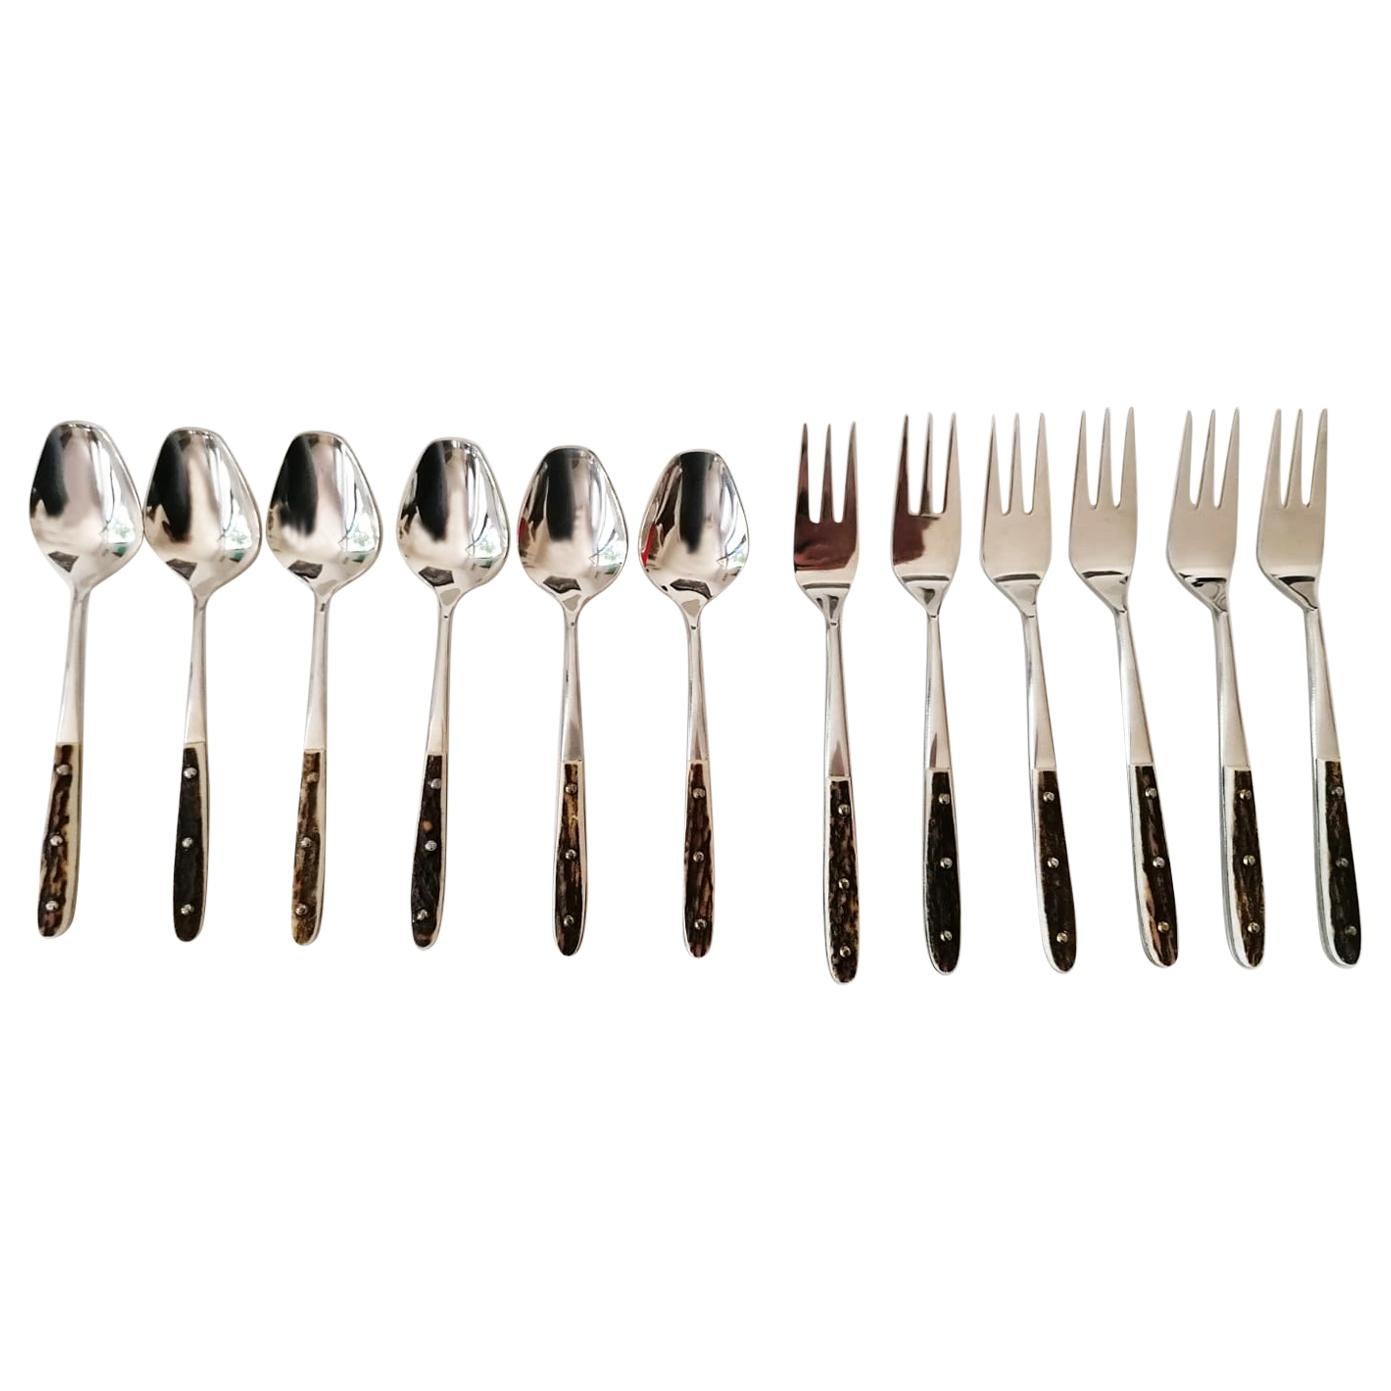 Part of Cutlery by Helmut Alder for Amboss Model 2070